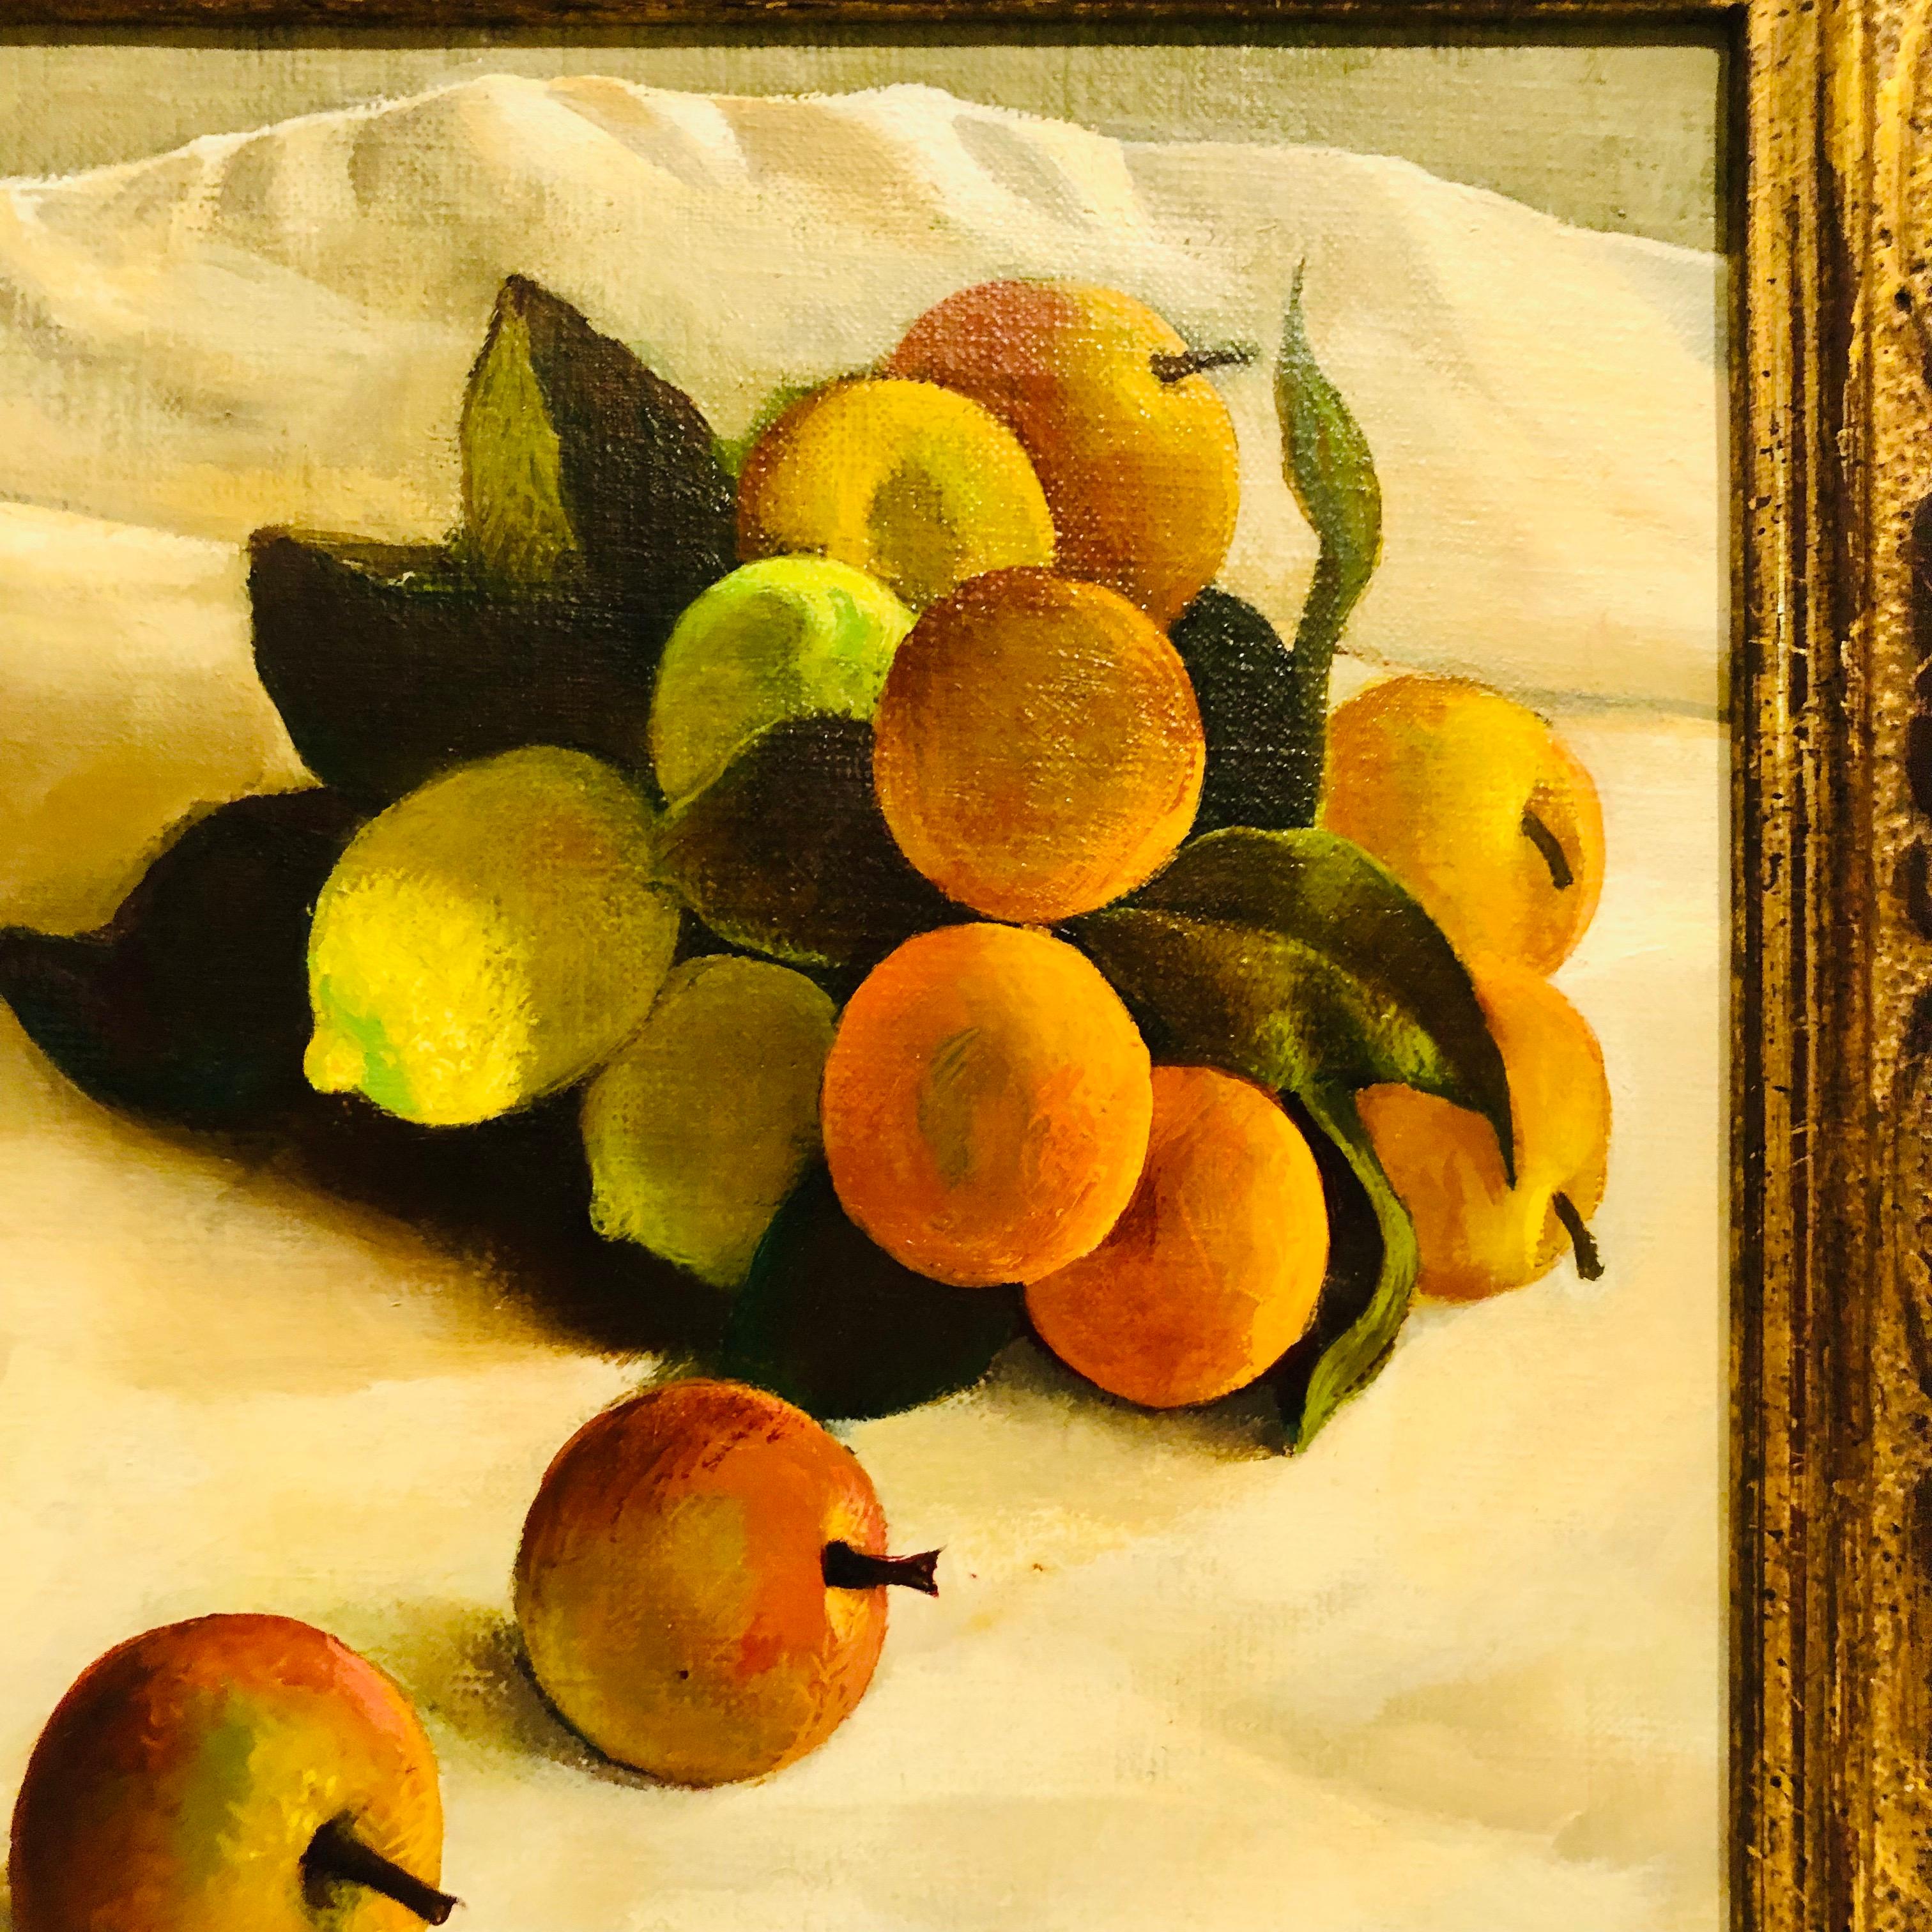 Late 20th Century Oil on Canvas Painting of Pears and Other Fruits in a Gold Frame Signed Nadeau